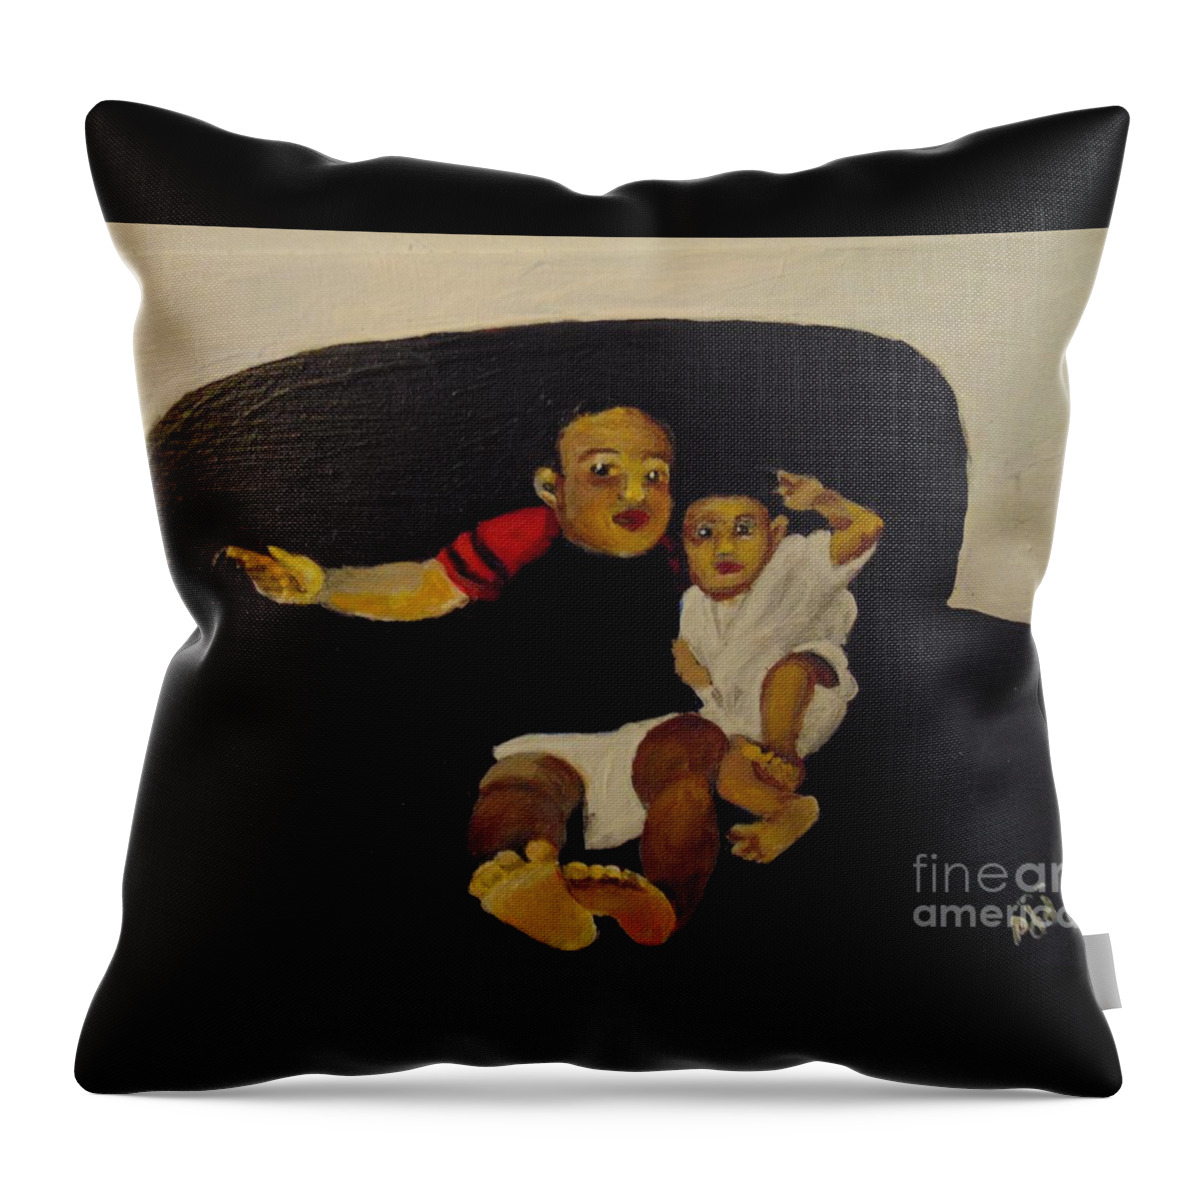 Babies Throw Pillow featuring the painting Cherubs by Saundra Johnson